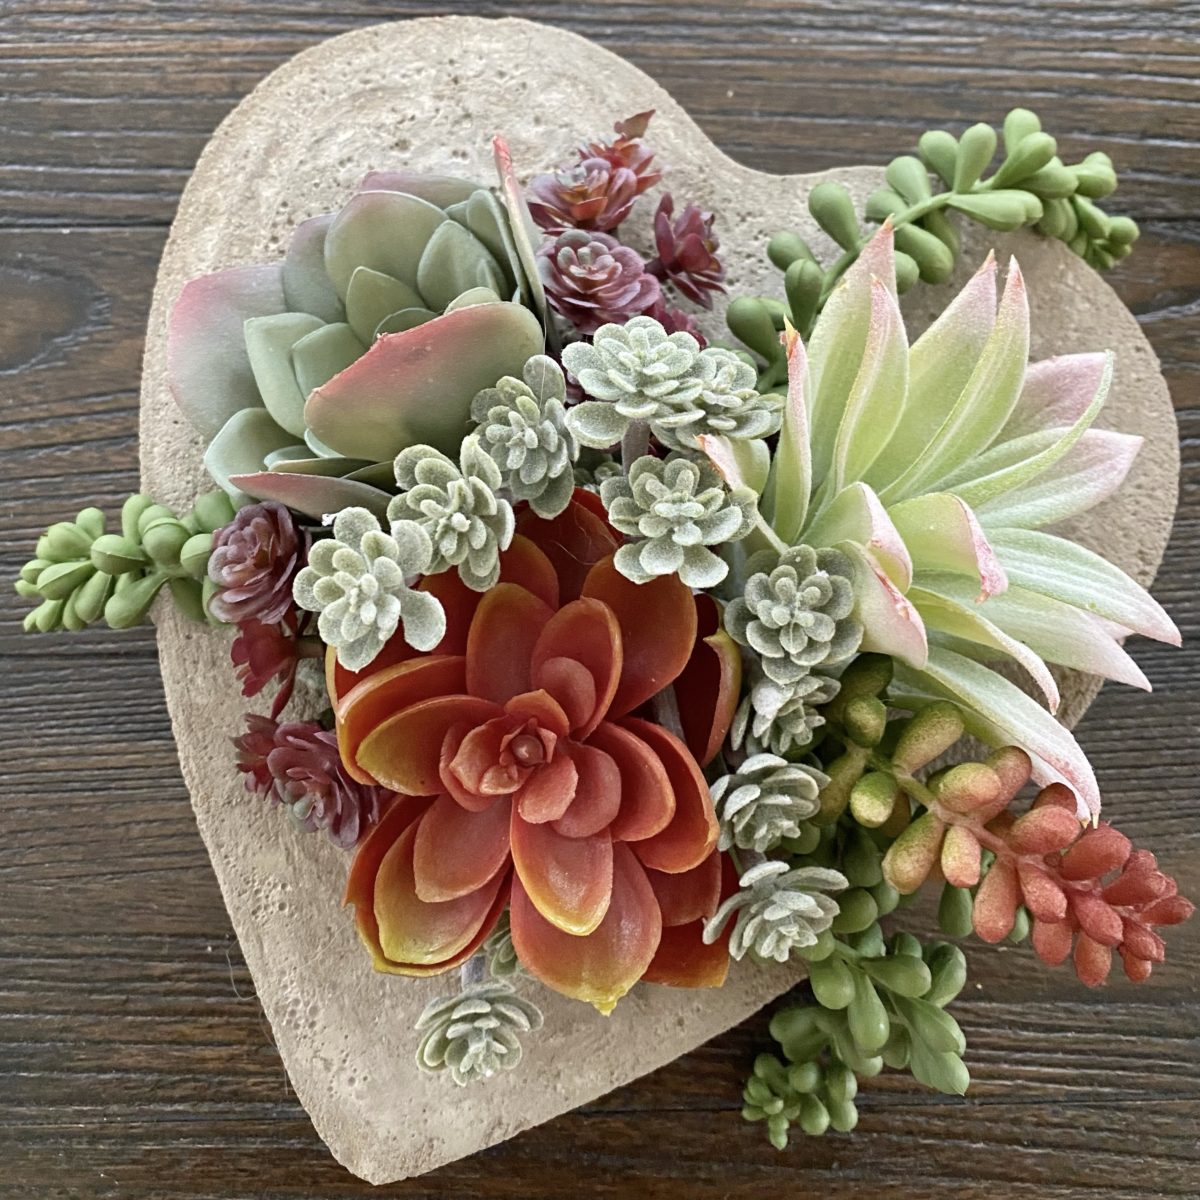 DIY concrete heart planter with a variety of faux succulents arranged in it.